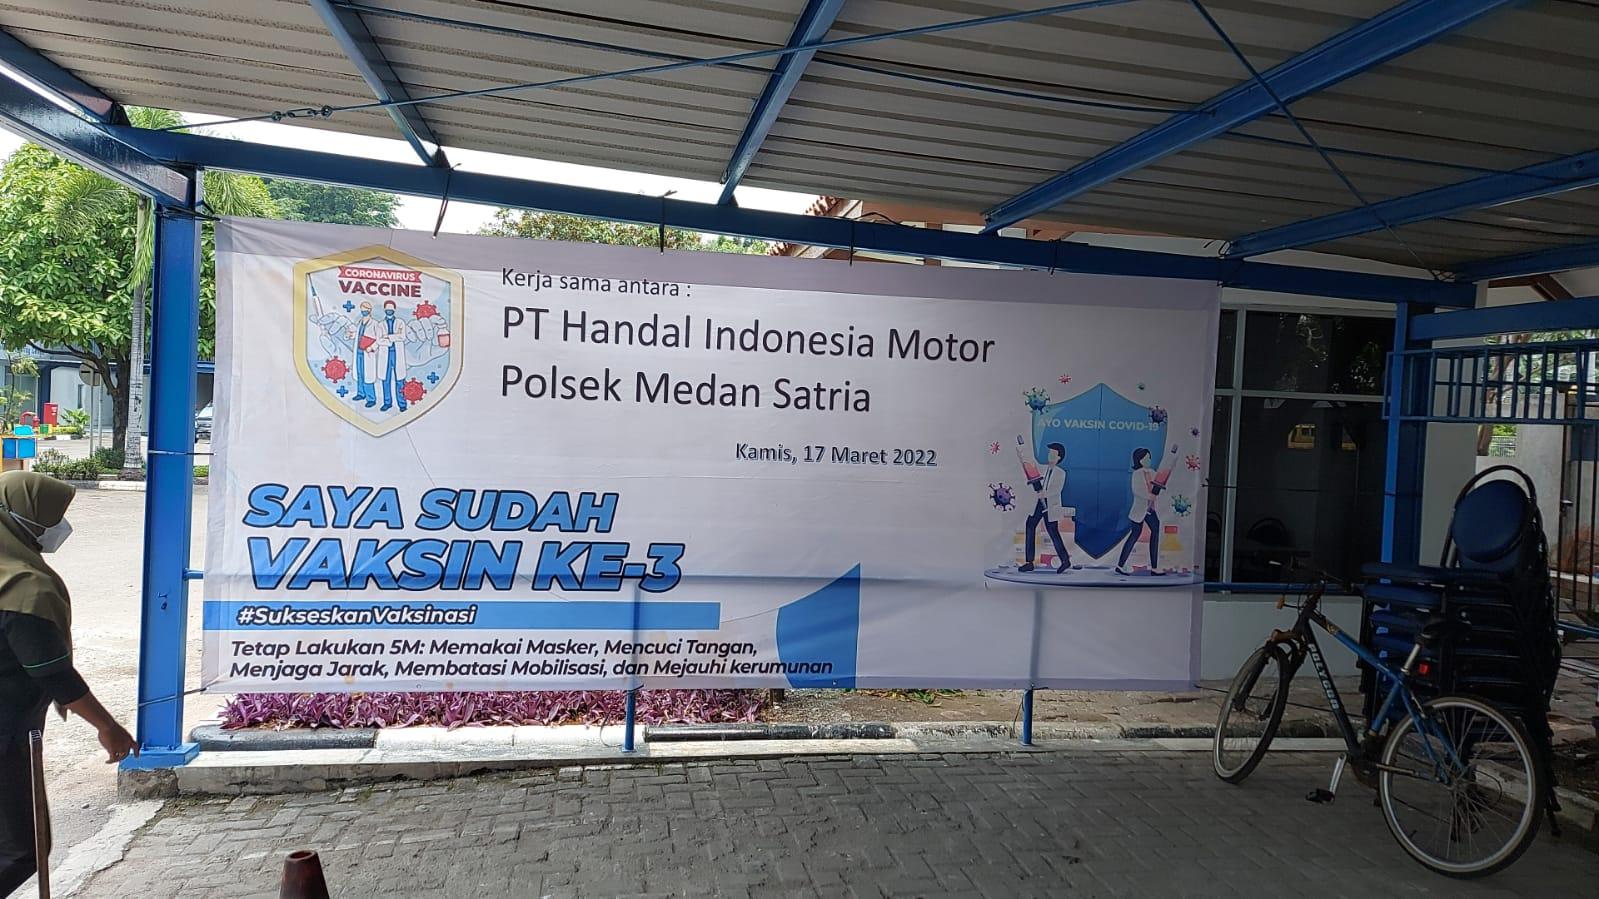 PT Handal Indonesia Motor Together with Medan Satria Police Held Covid-19 Vaccination